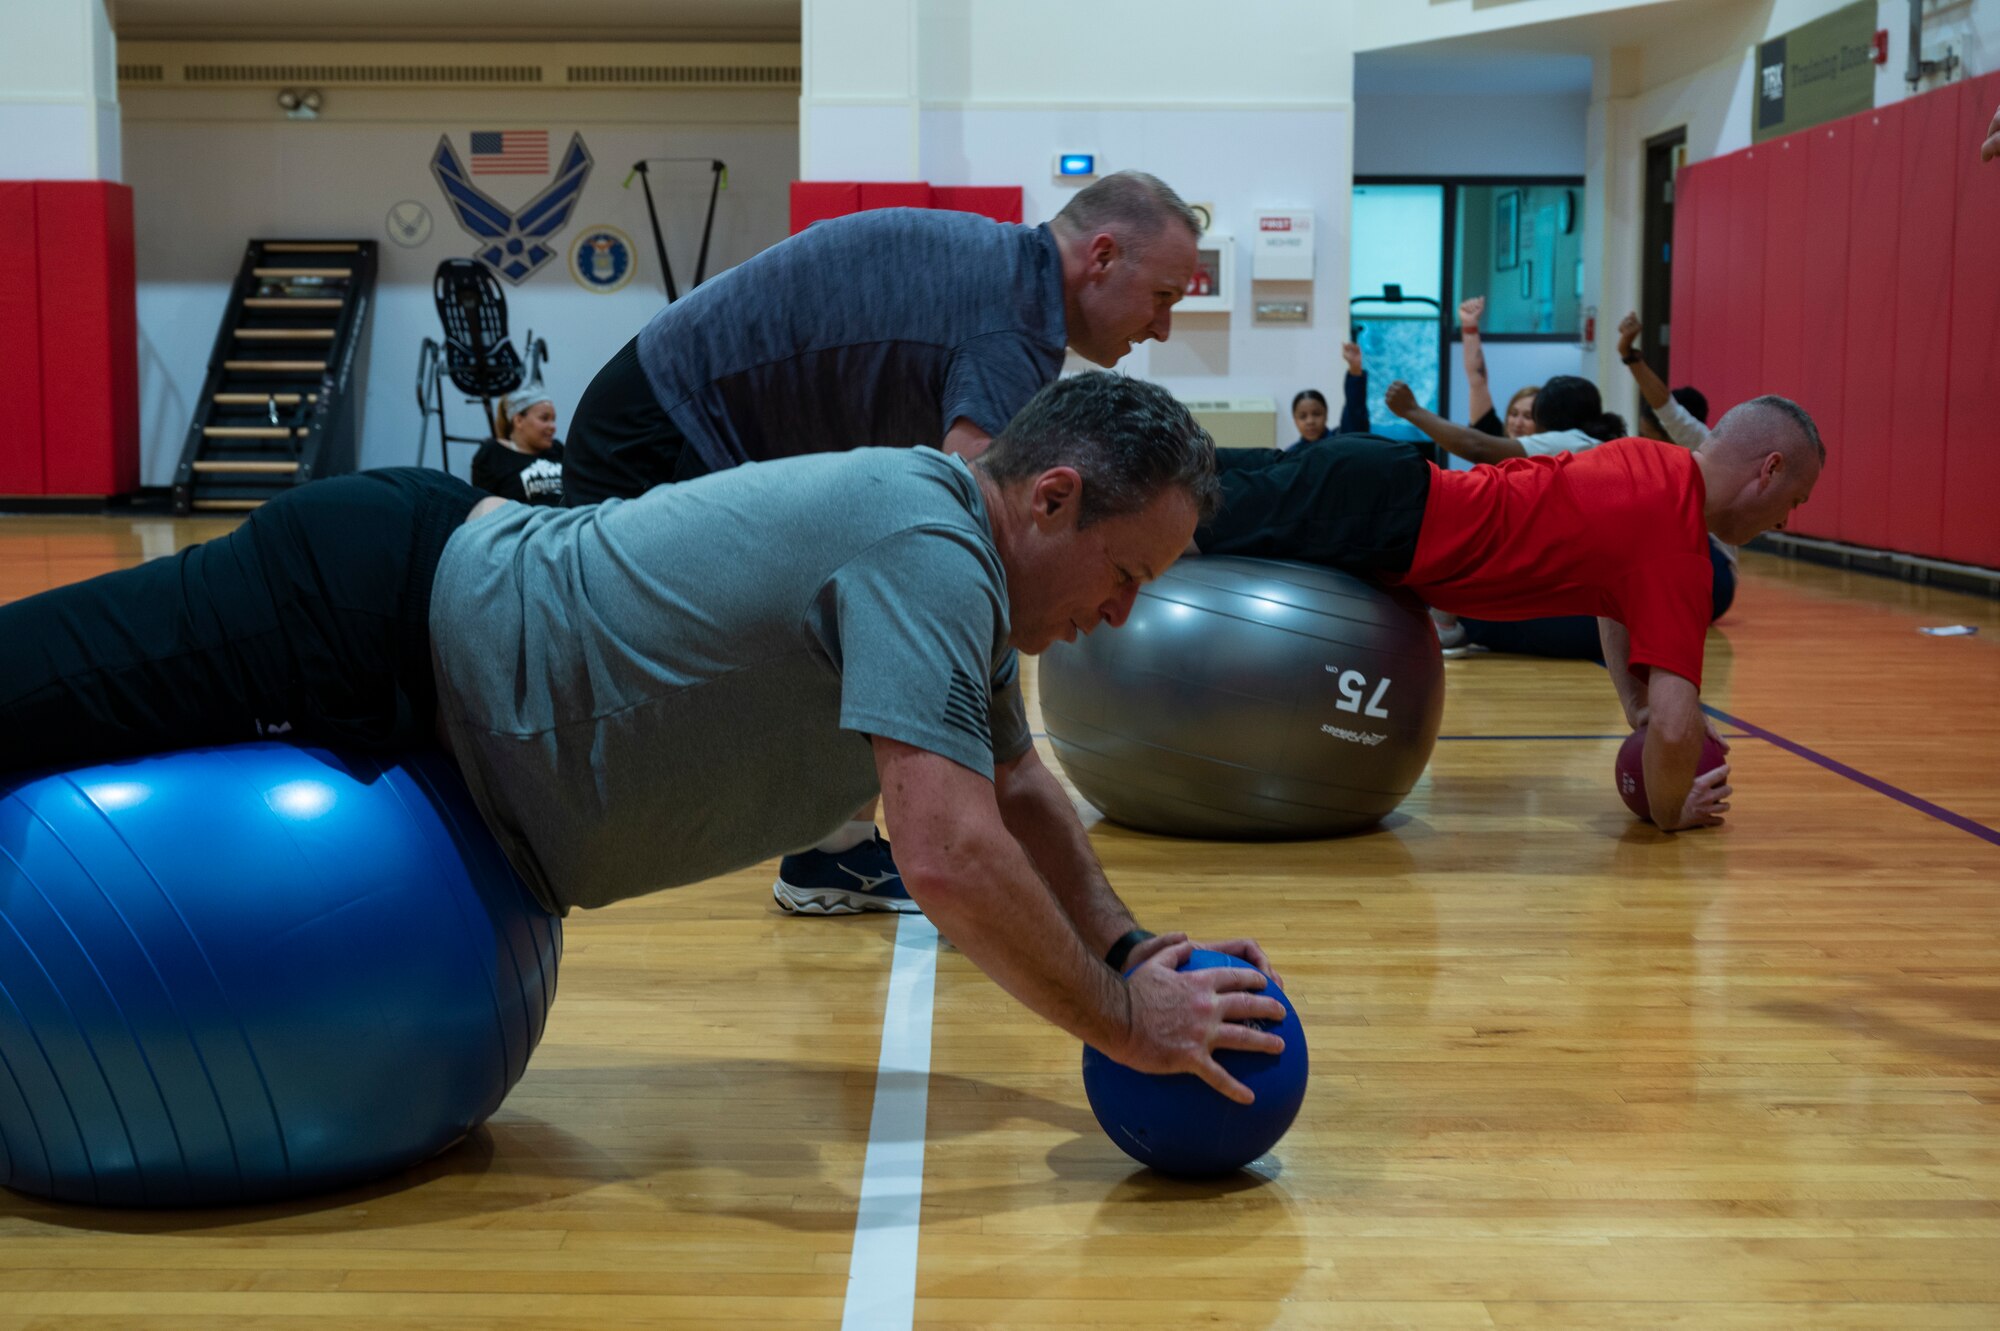 Lowell T. Bingham, 911th Airlift Wing Chief of Staff, performs push-ups on an exercise ball at the Pittsburgh International Airport Air Reserve Station, Pennsylvania, March 5, 2022.